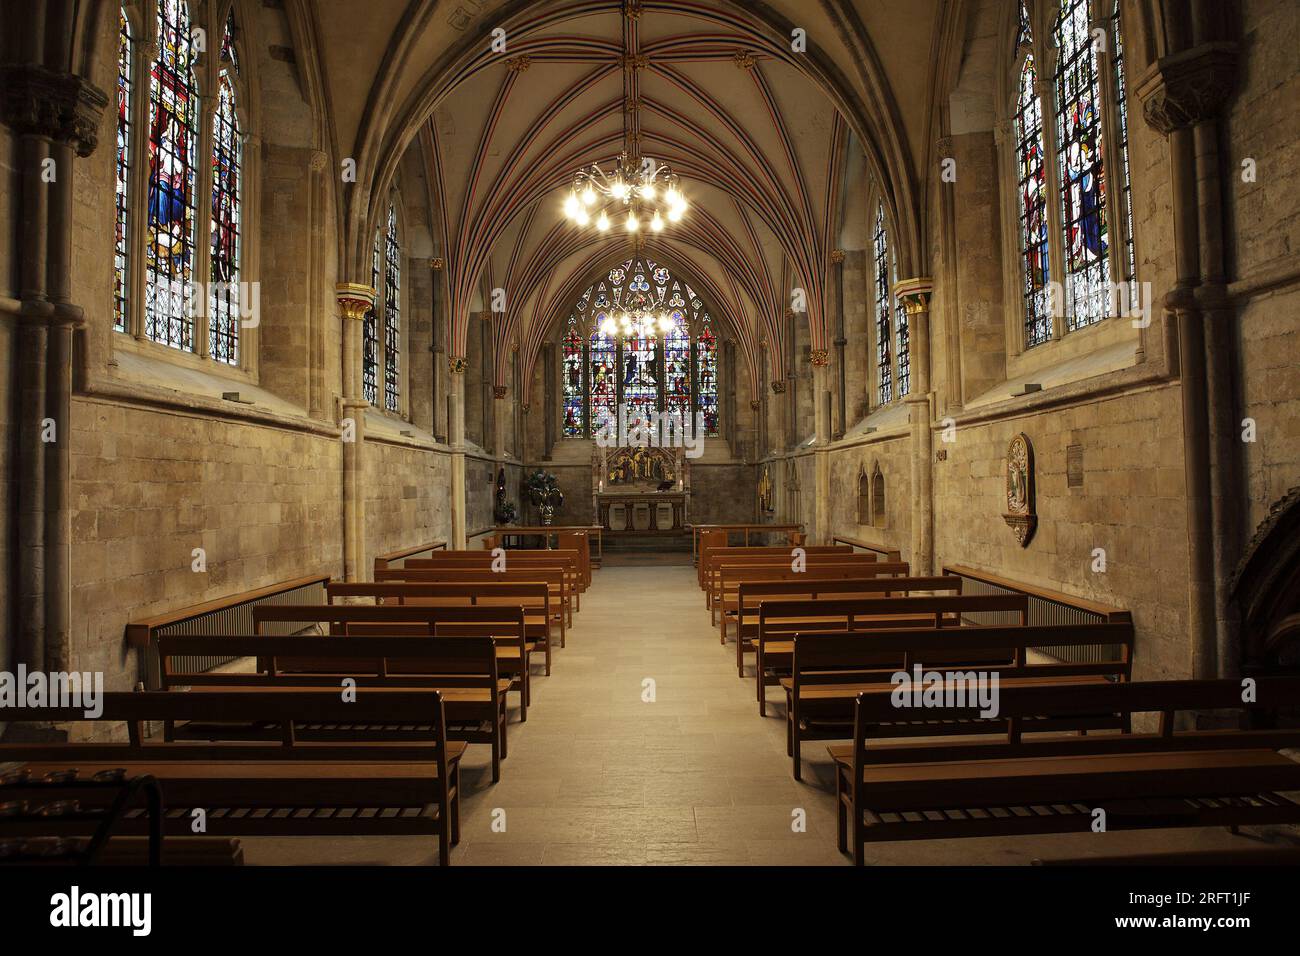 The Lady Chapel at Chichester Cathedral is situated at the easterly end of the Cathedral. Stock Photo